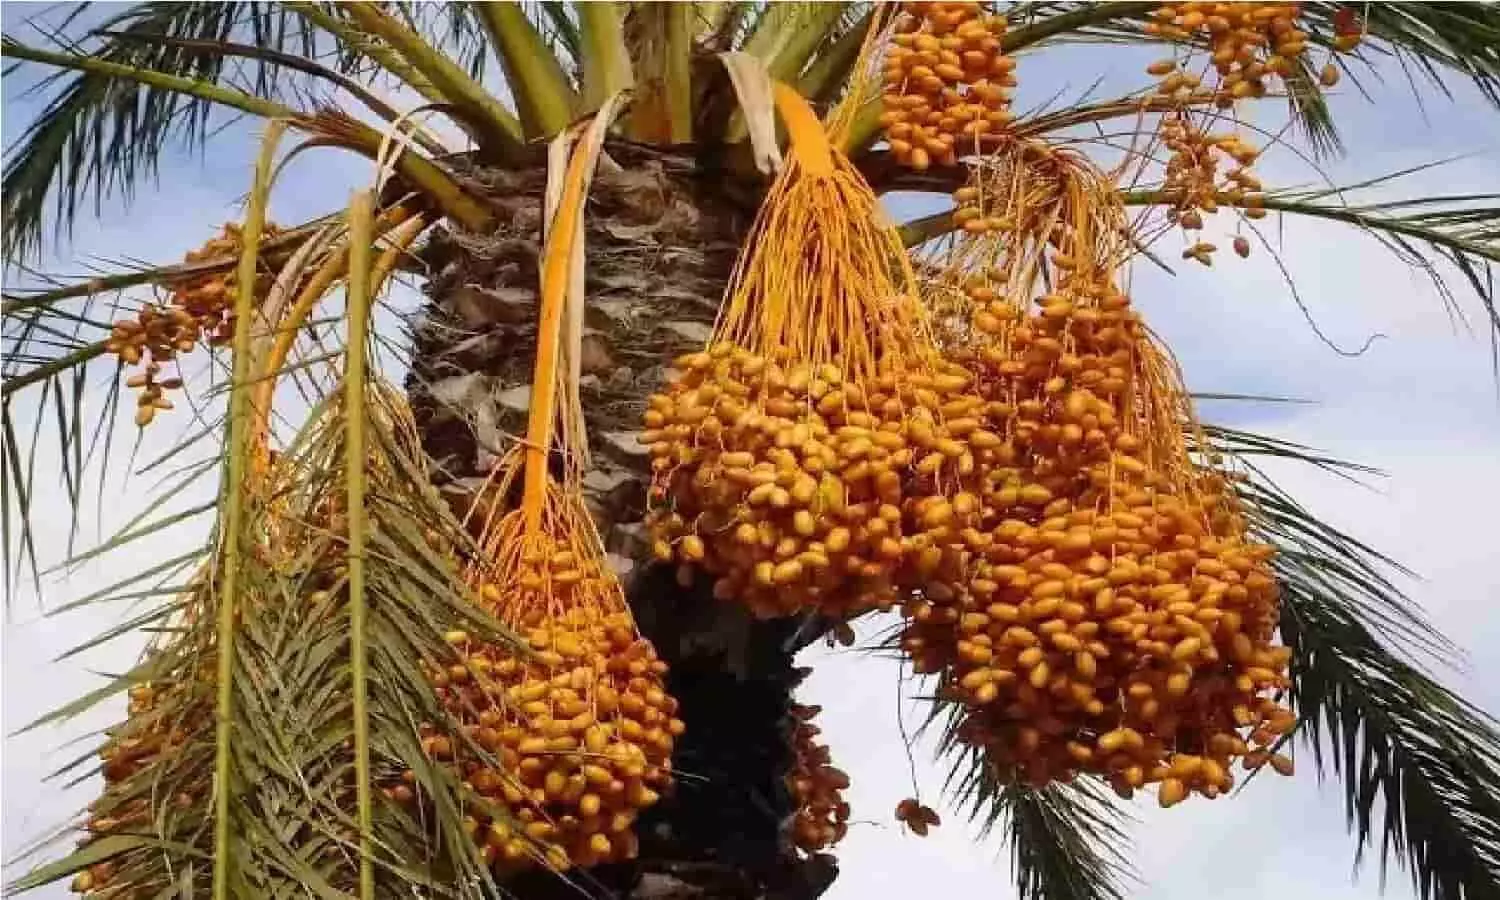 Date Palm Cultivation